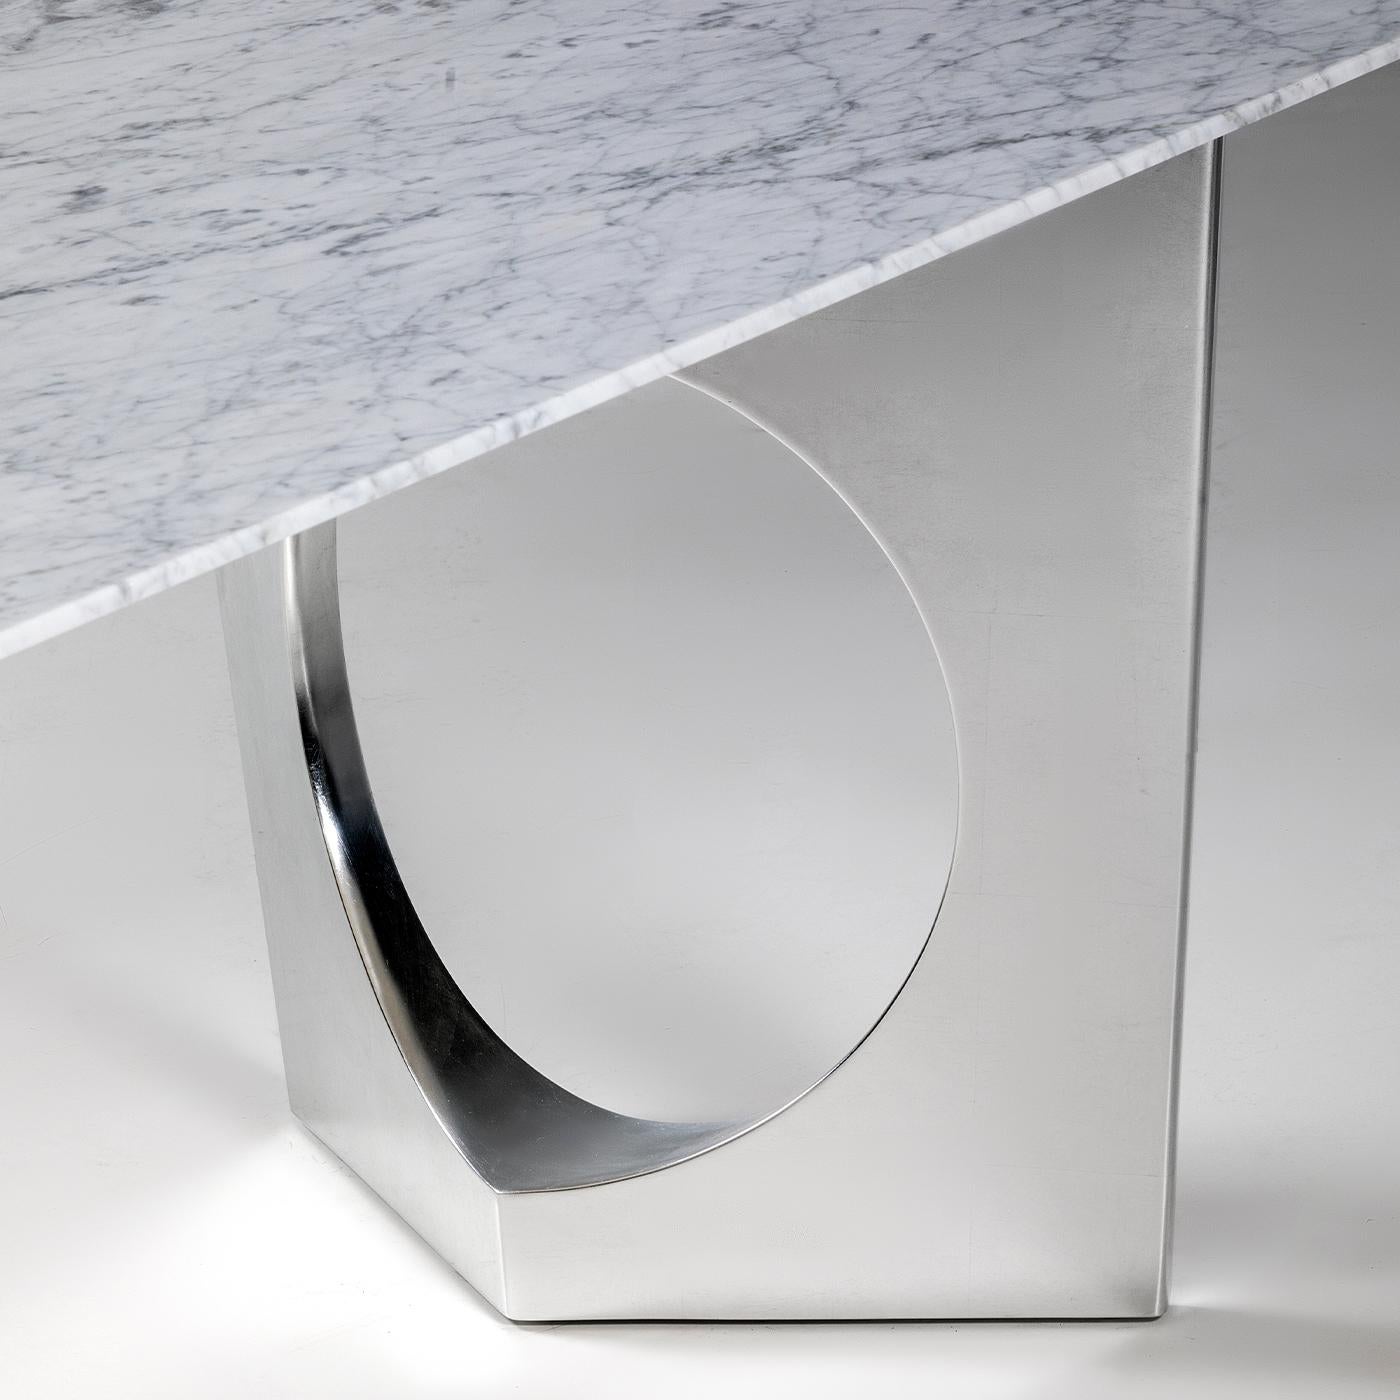 Entirely crafted of white Carrara marble, the Michelangelo Table boasts a sublimely smooth surface and sleek aesthetic that exudes an air of modern glamour. The linear and attractive design by Carlo Bimbi is defined by two architectural legs created